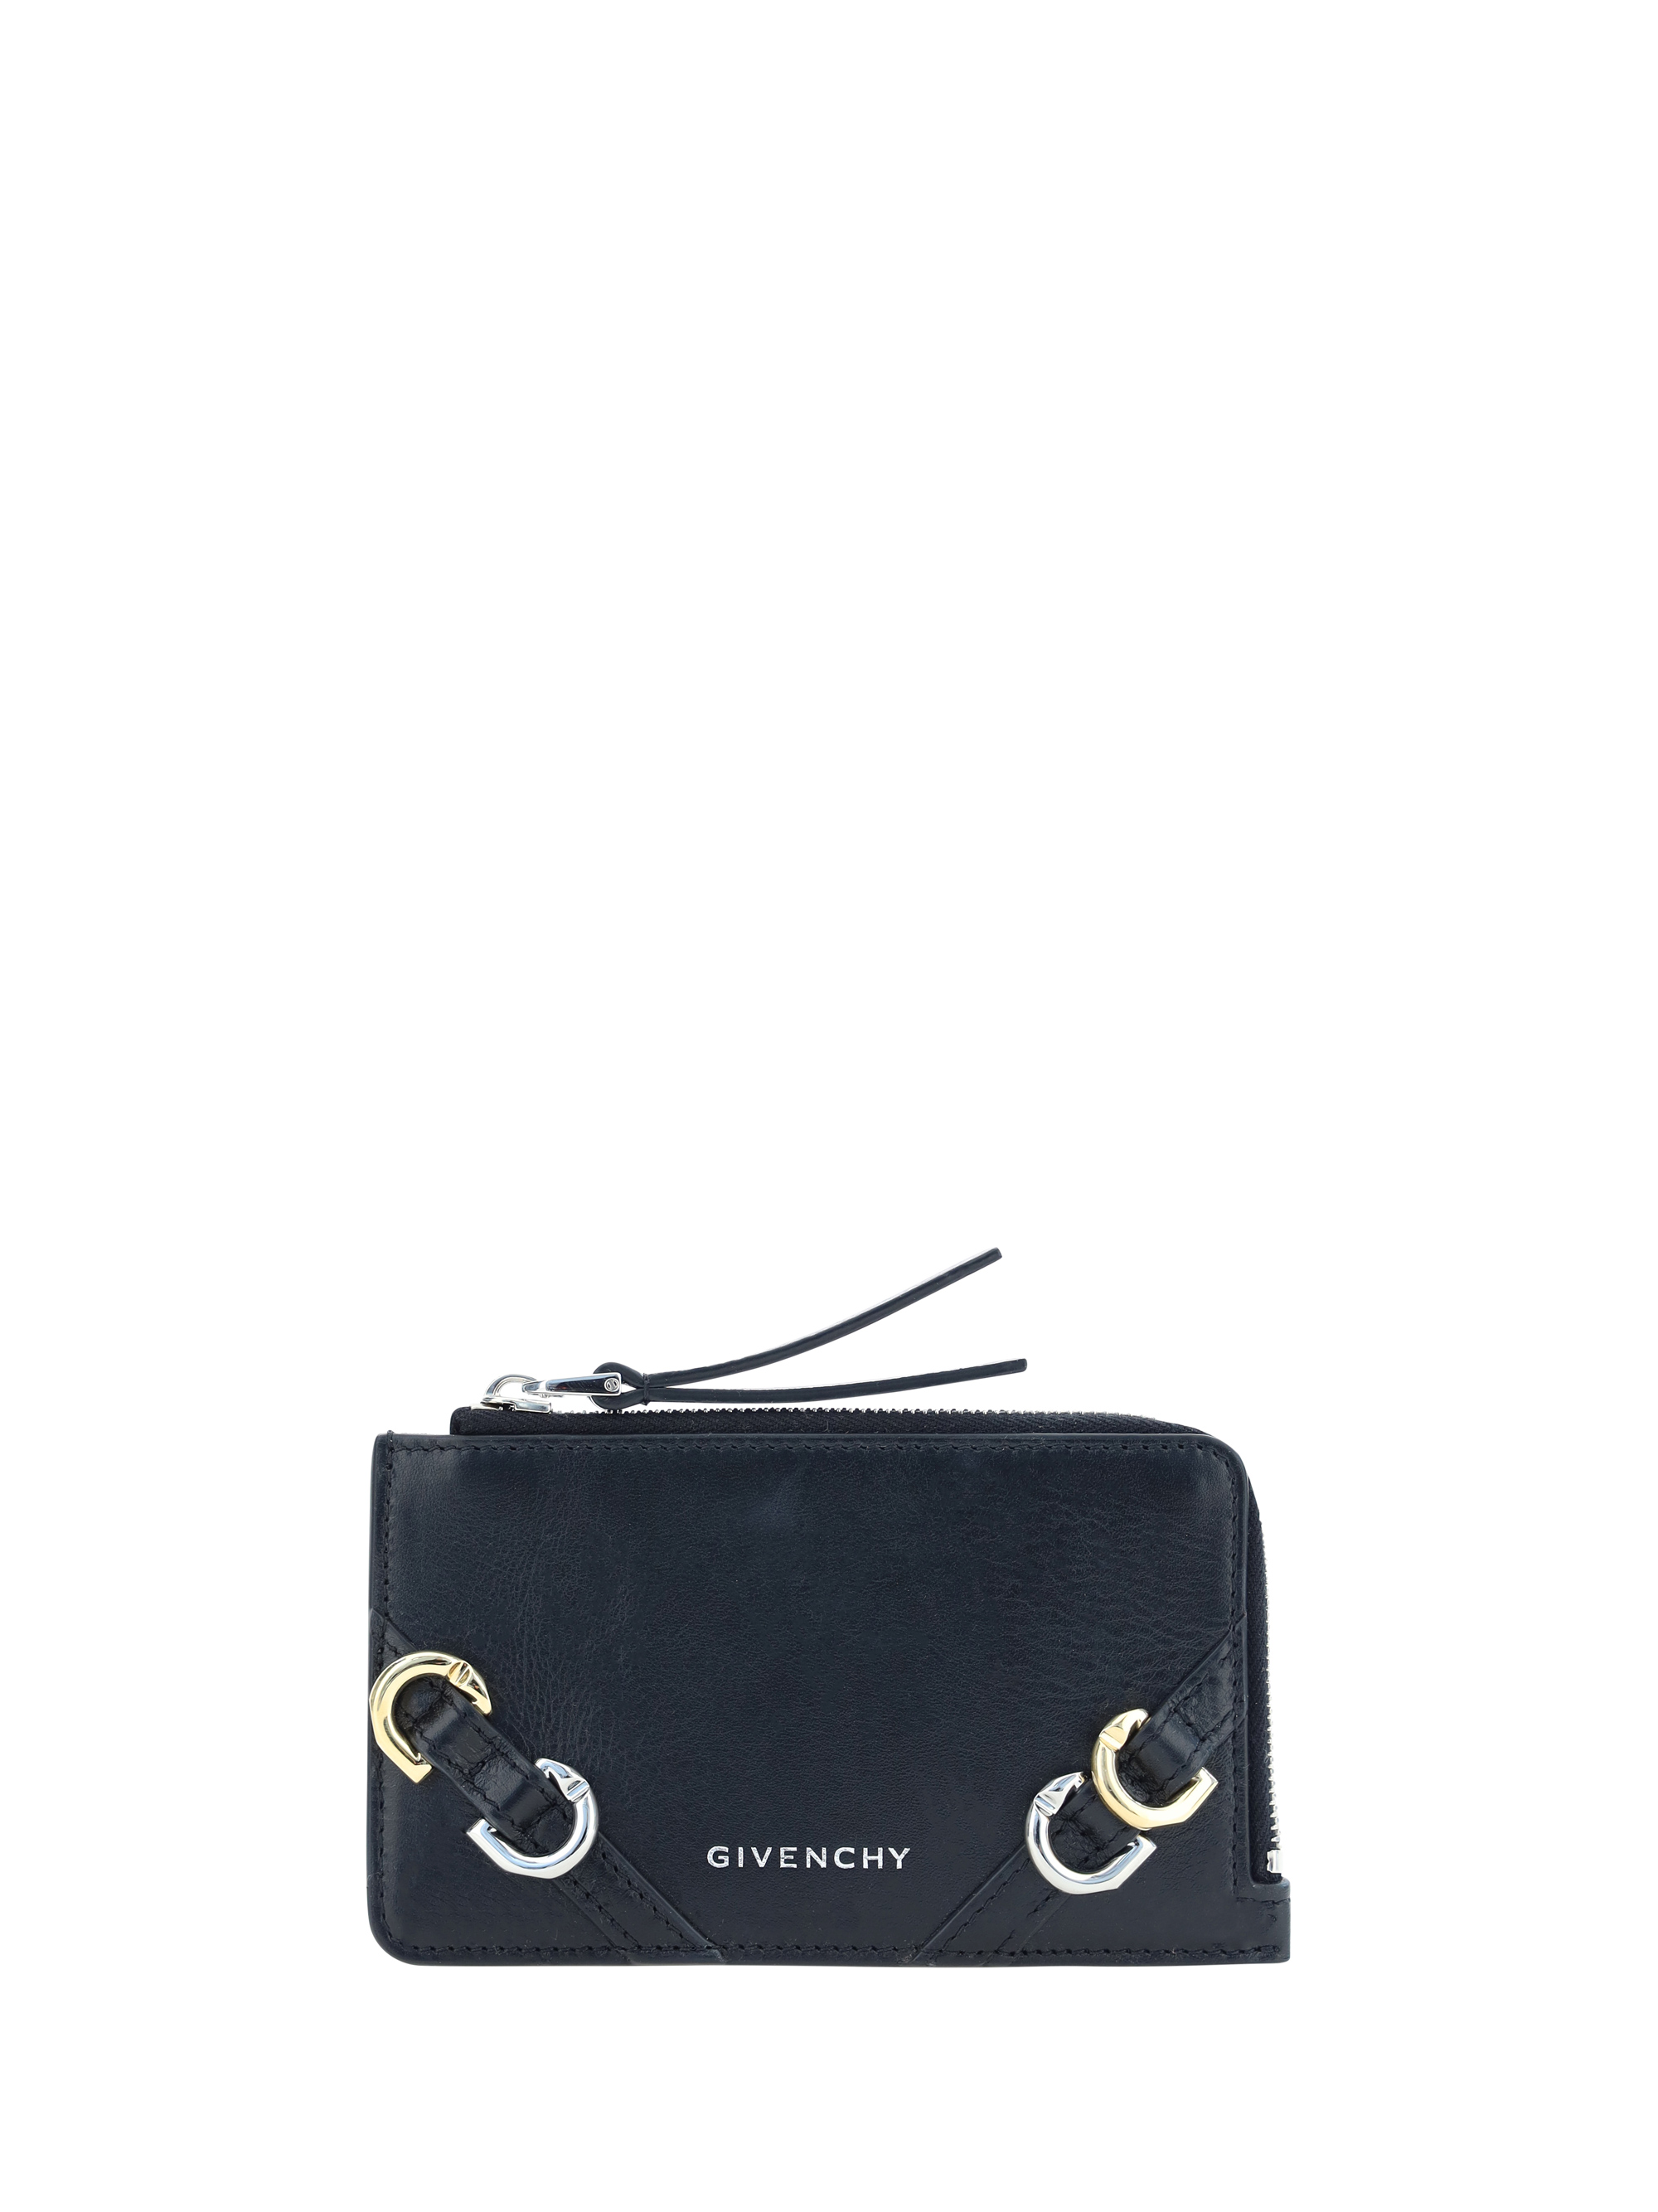 Givenchy Voyou Card Case In Black